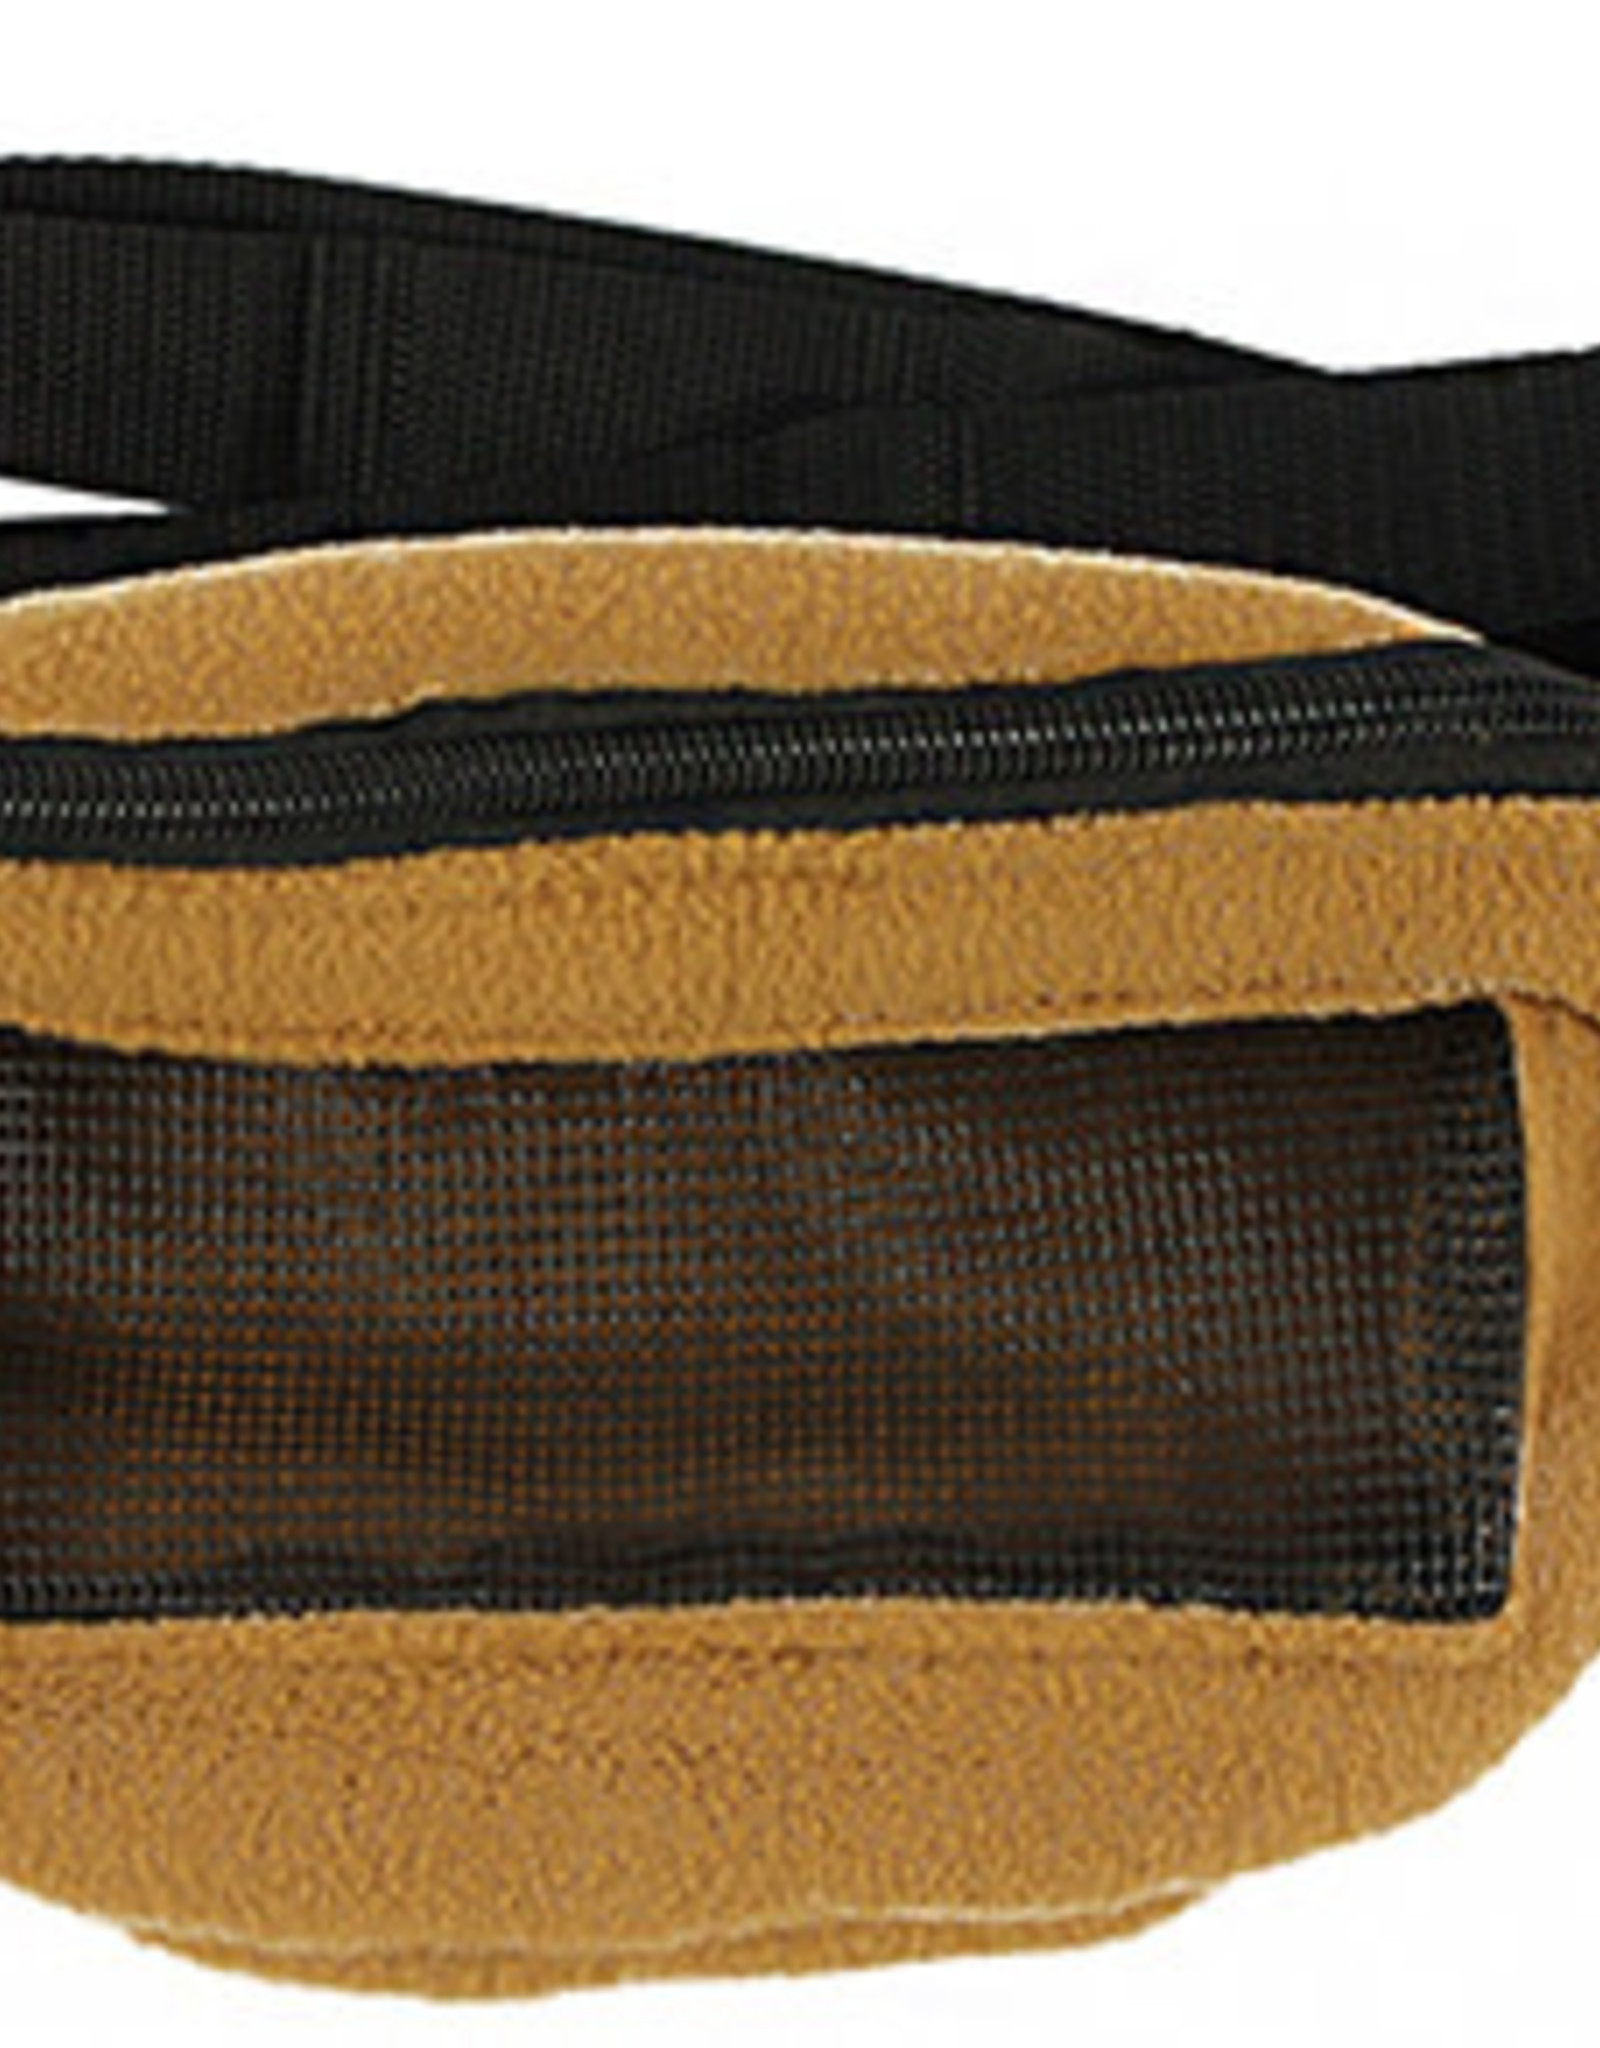 EXOTIC NUTRITION EXOTIC NUTRITION- SUGAR GLIDER FANNY PACK- GREY